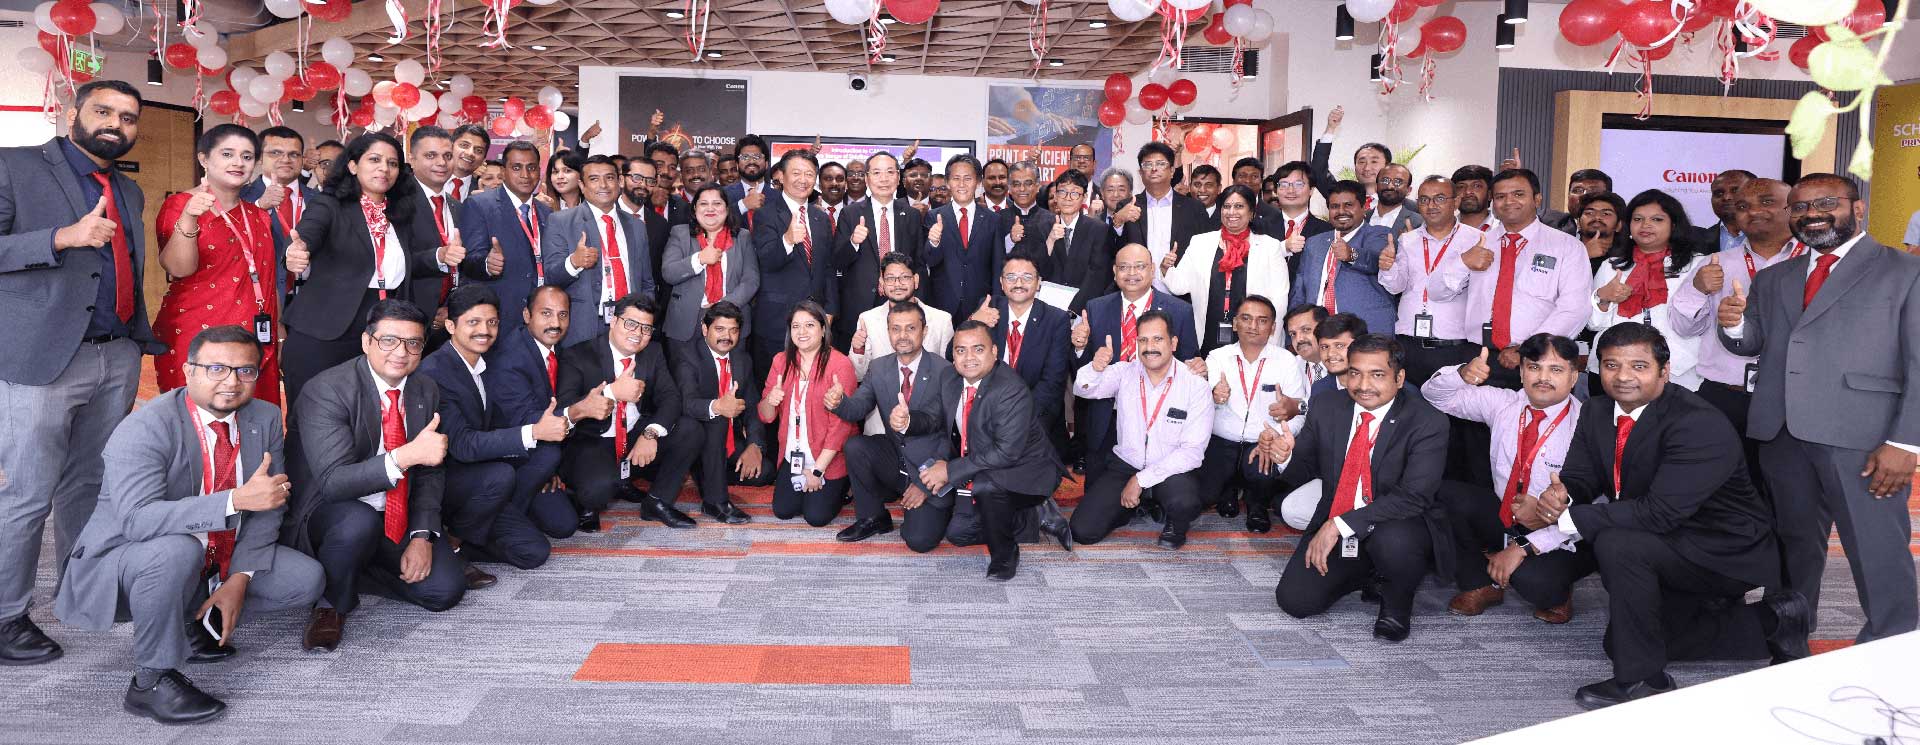 Canon India expands ‘Live Office Infrastructure’ to South, unveiling the state-of-the-art ecosystem for customers, partners, and employees in Bengaluru